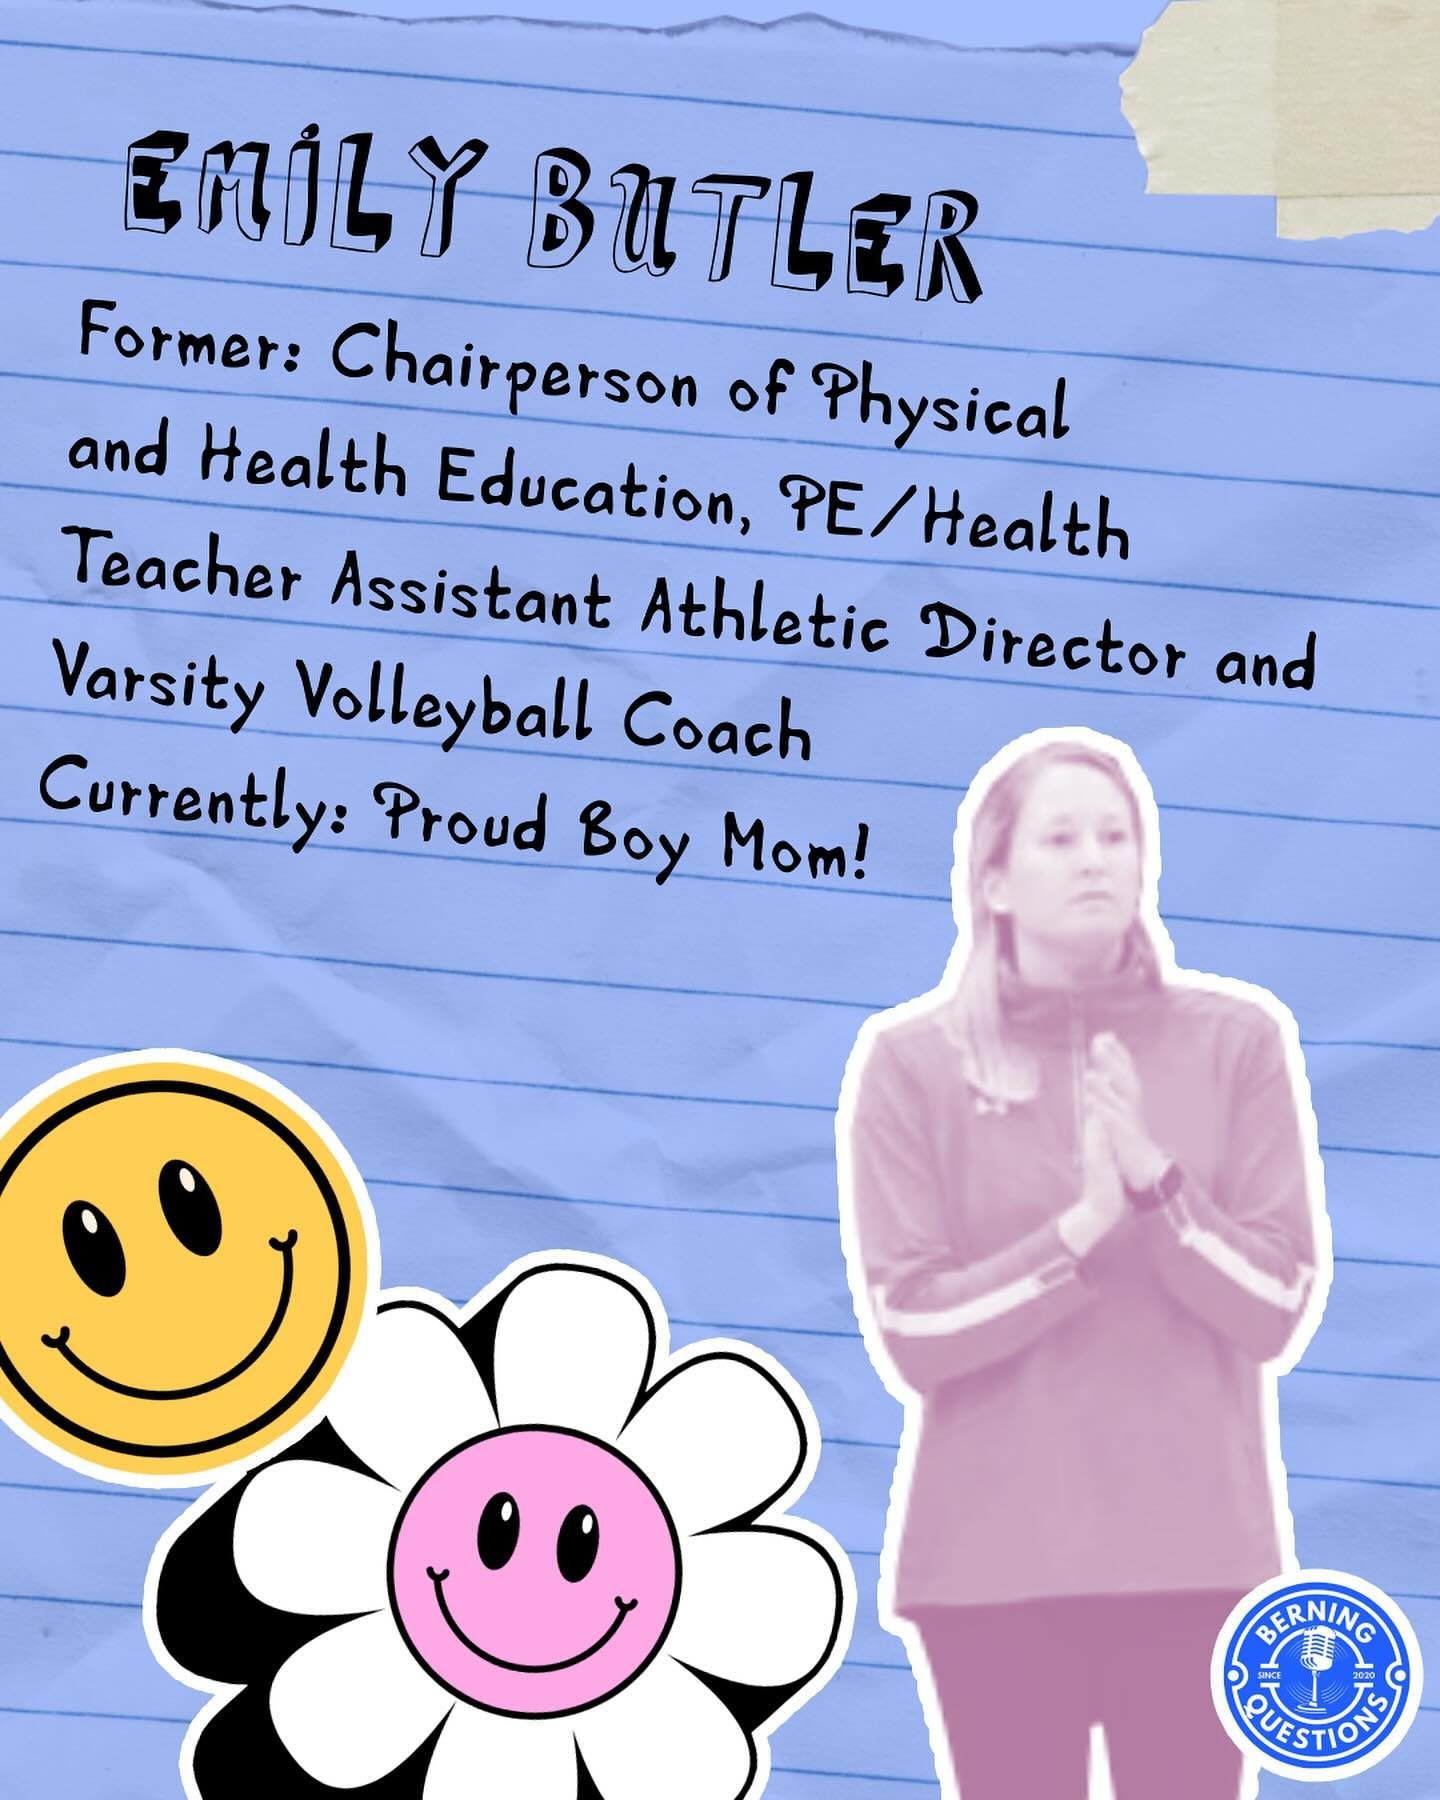 Meet Emily Butler! ✏️

Former chairperson of Physical and Health education, a PE/ Health teacher, Assistant Athletic Director, Varsity Volleyball Coach and now proud mom!! 🏐

We&rsquo;re by her ability to do it all and the impact she&rsquo;s left on